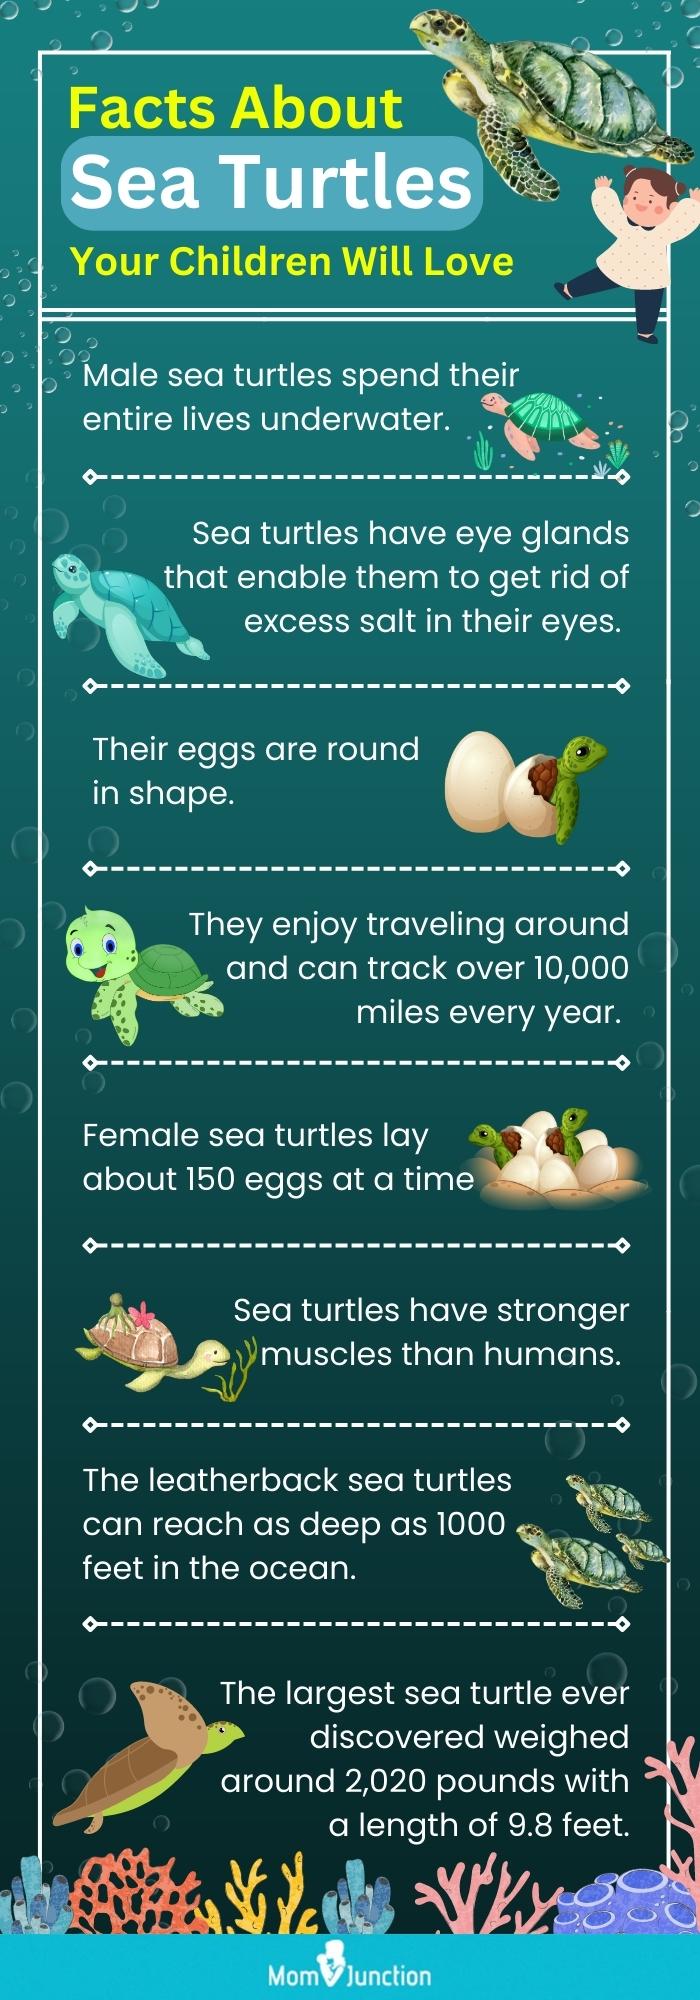 facts about sea turtles your children will love (infographic)